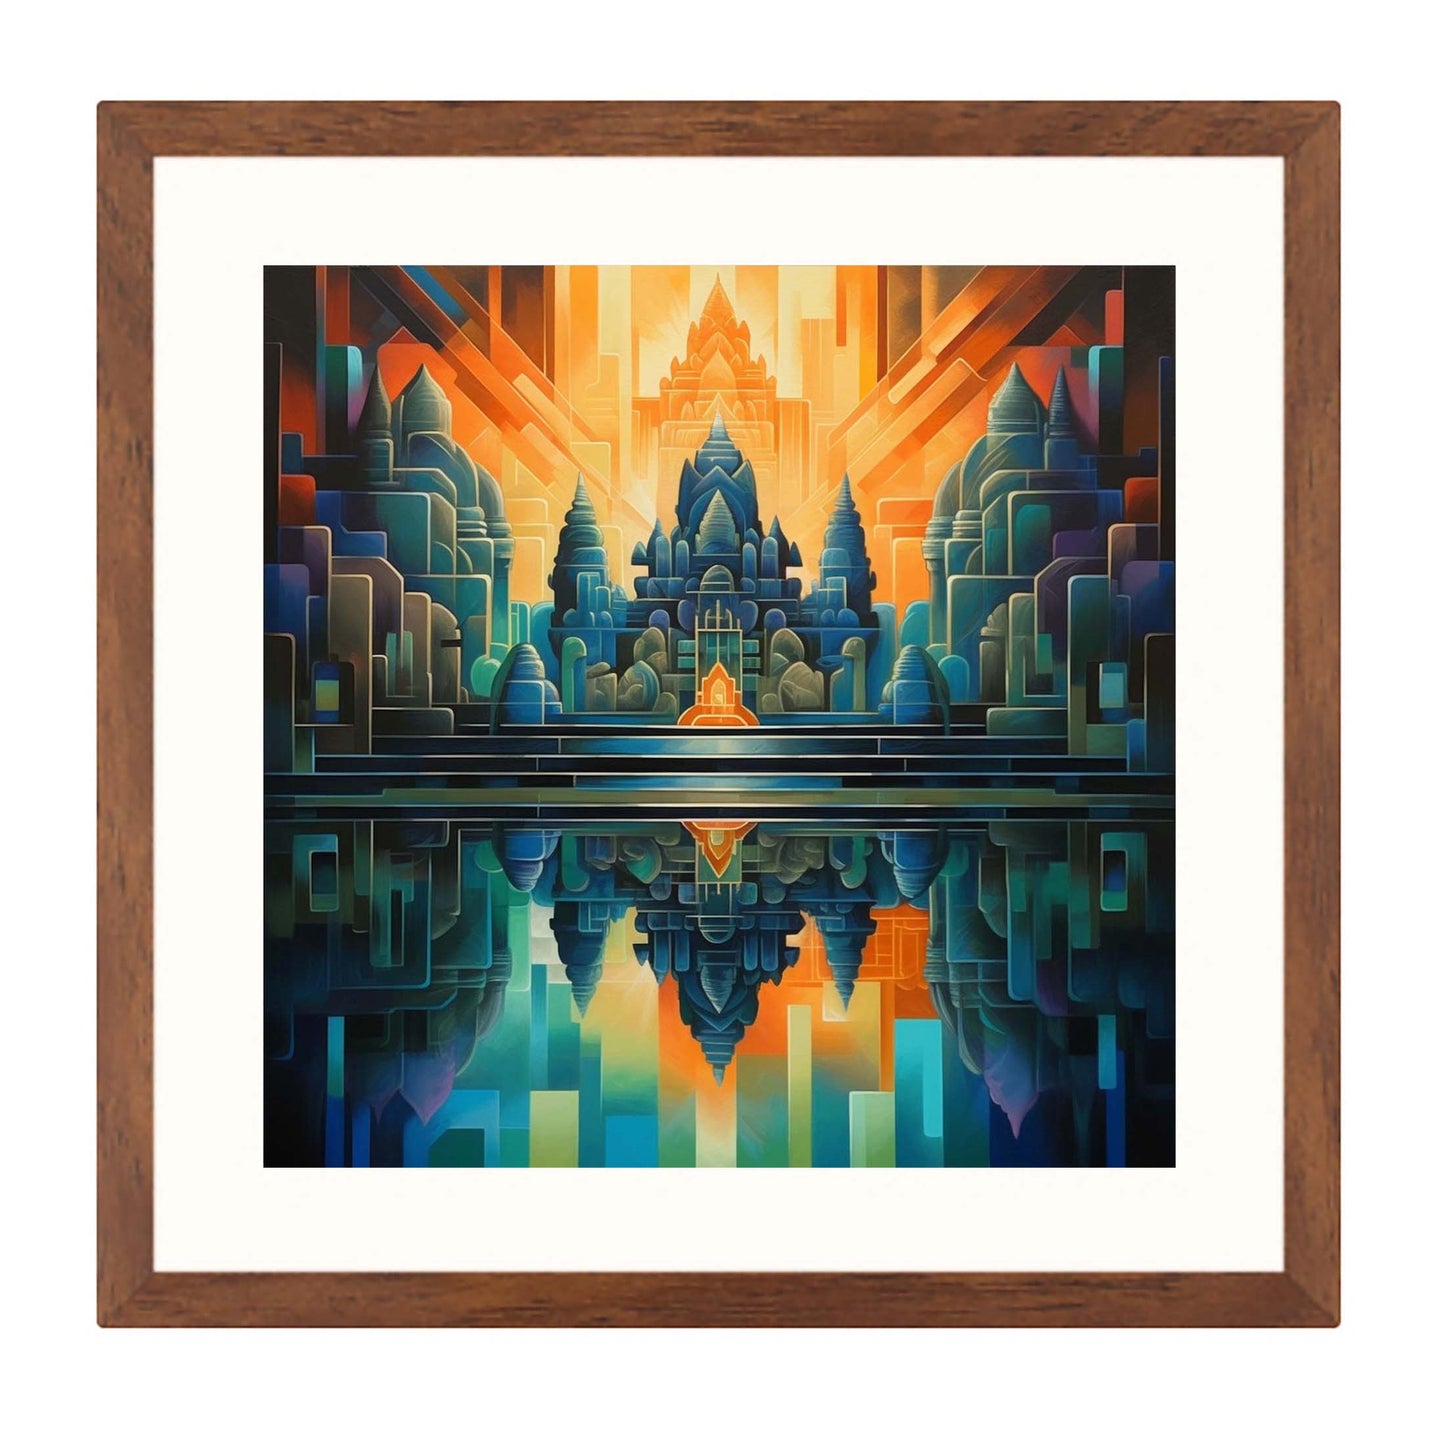 Angkor Wat - mural in the style of futurism